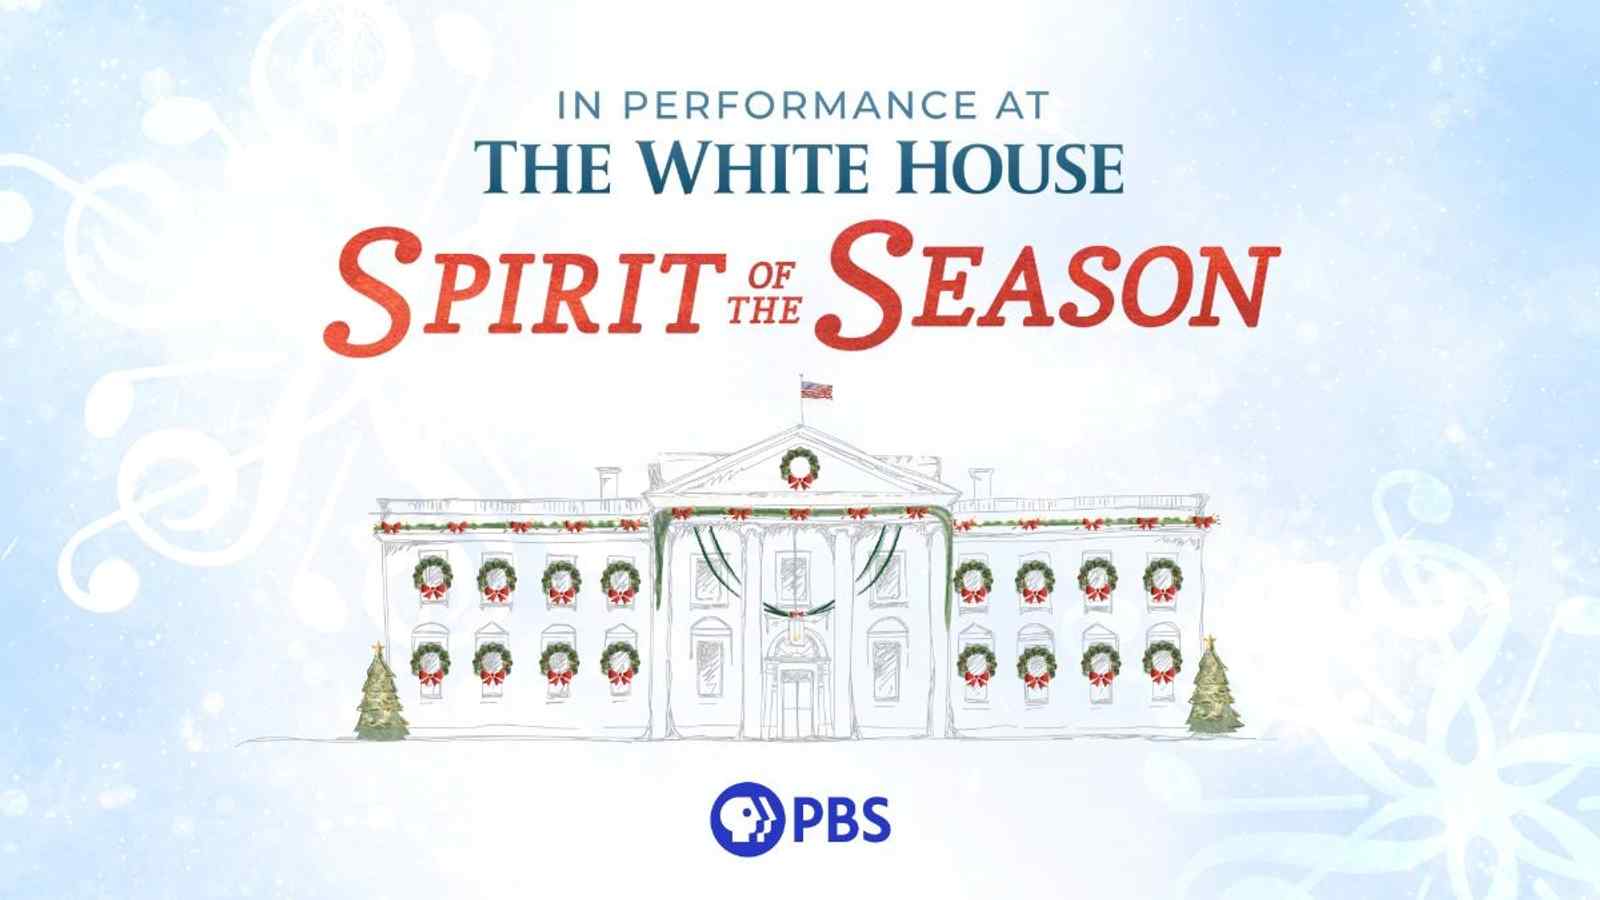 In Performance at the White House: Spirit of the Season